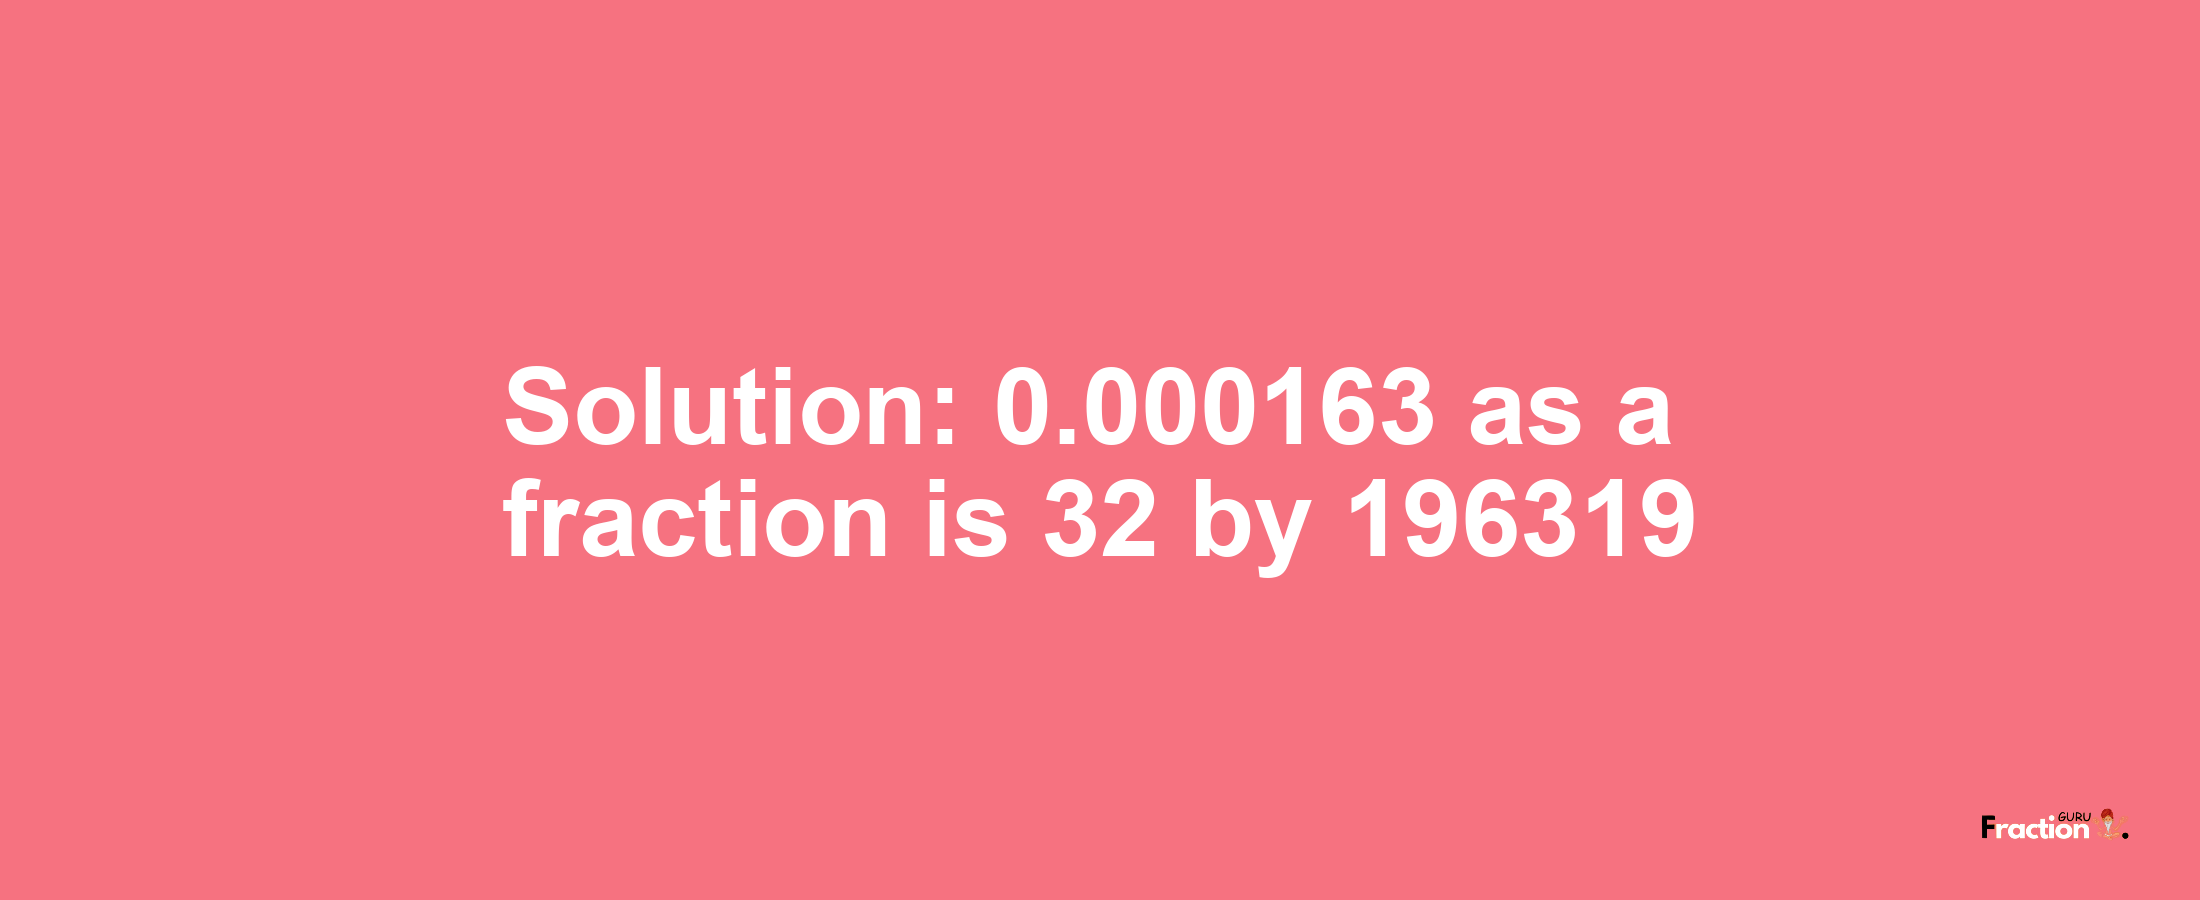 Solution:0.000163 as a fraction is 32/196319